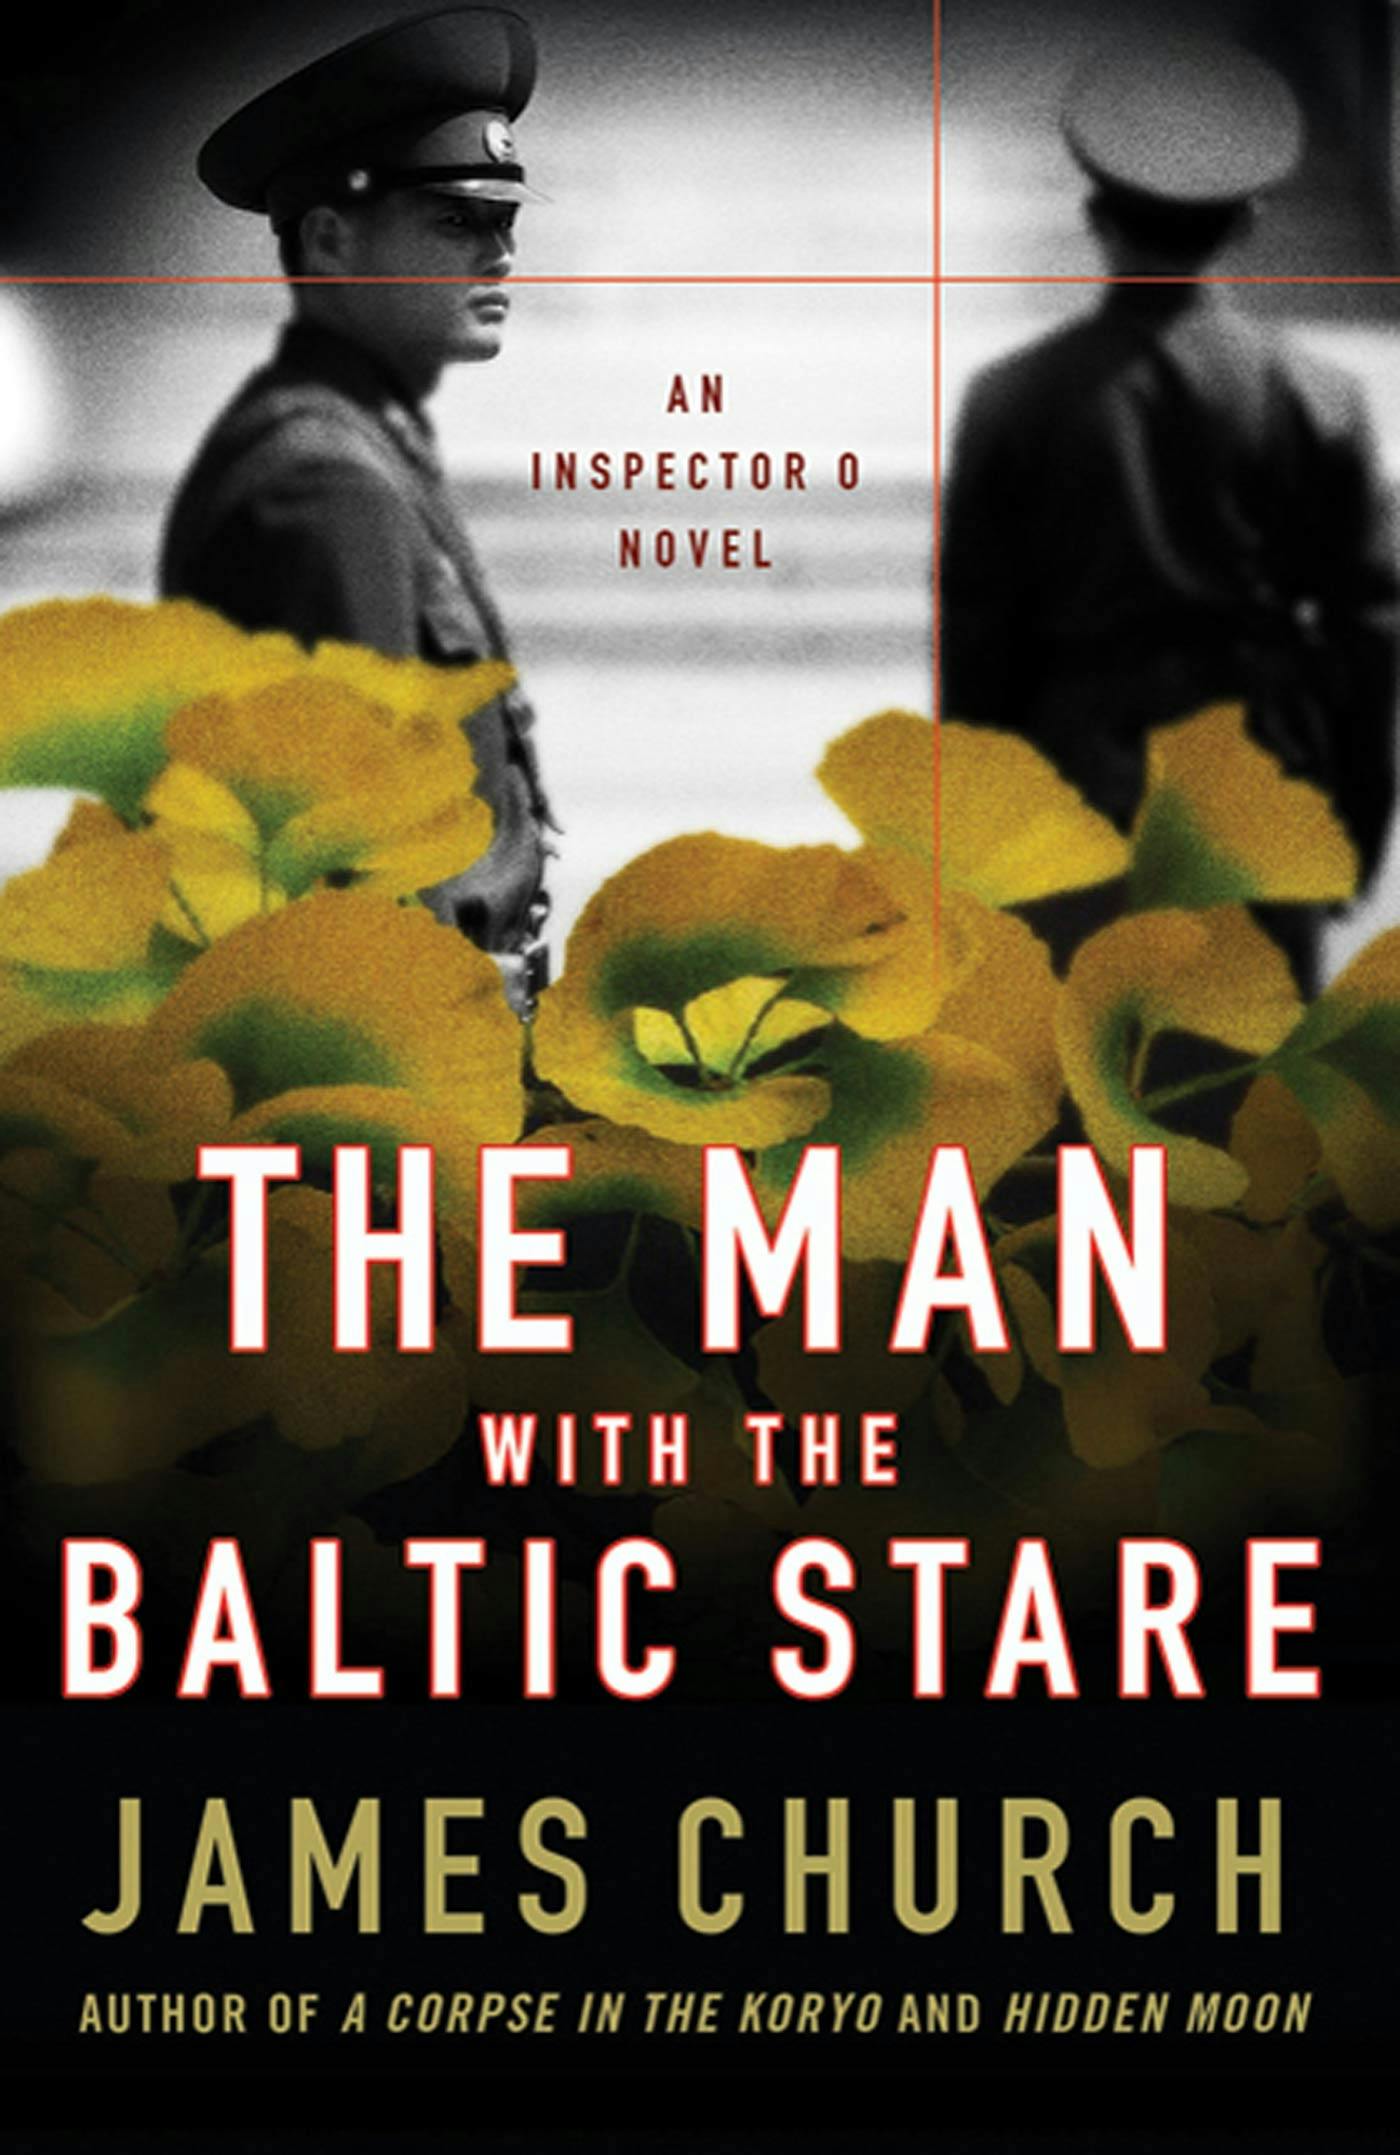 Image of The Man with the Baltic Stare